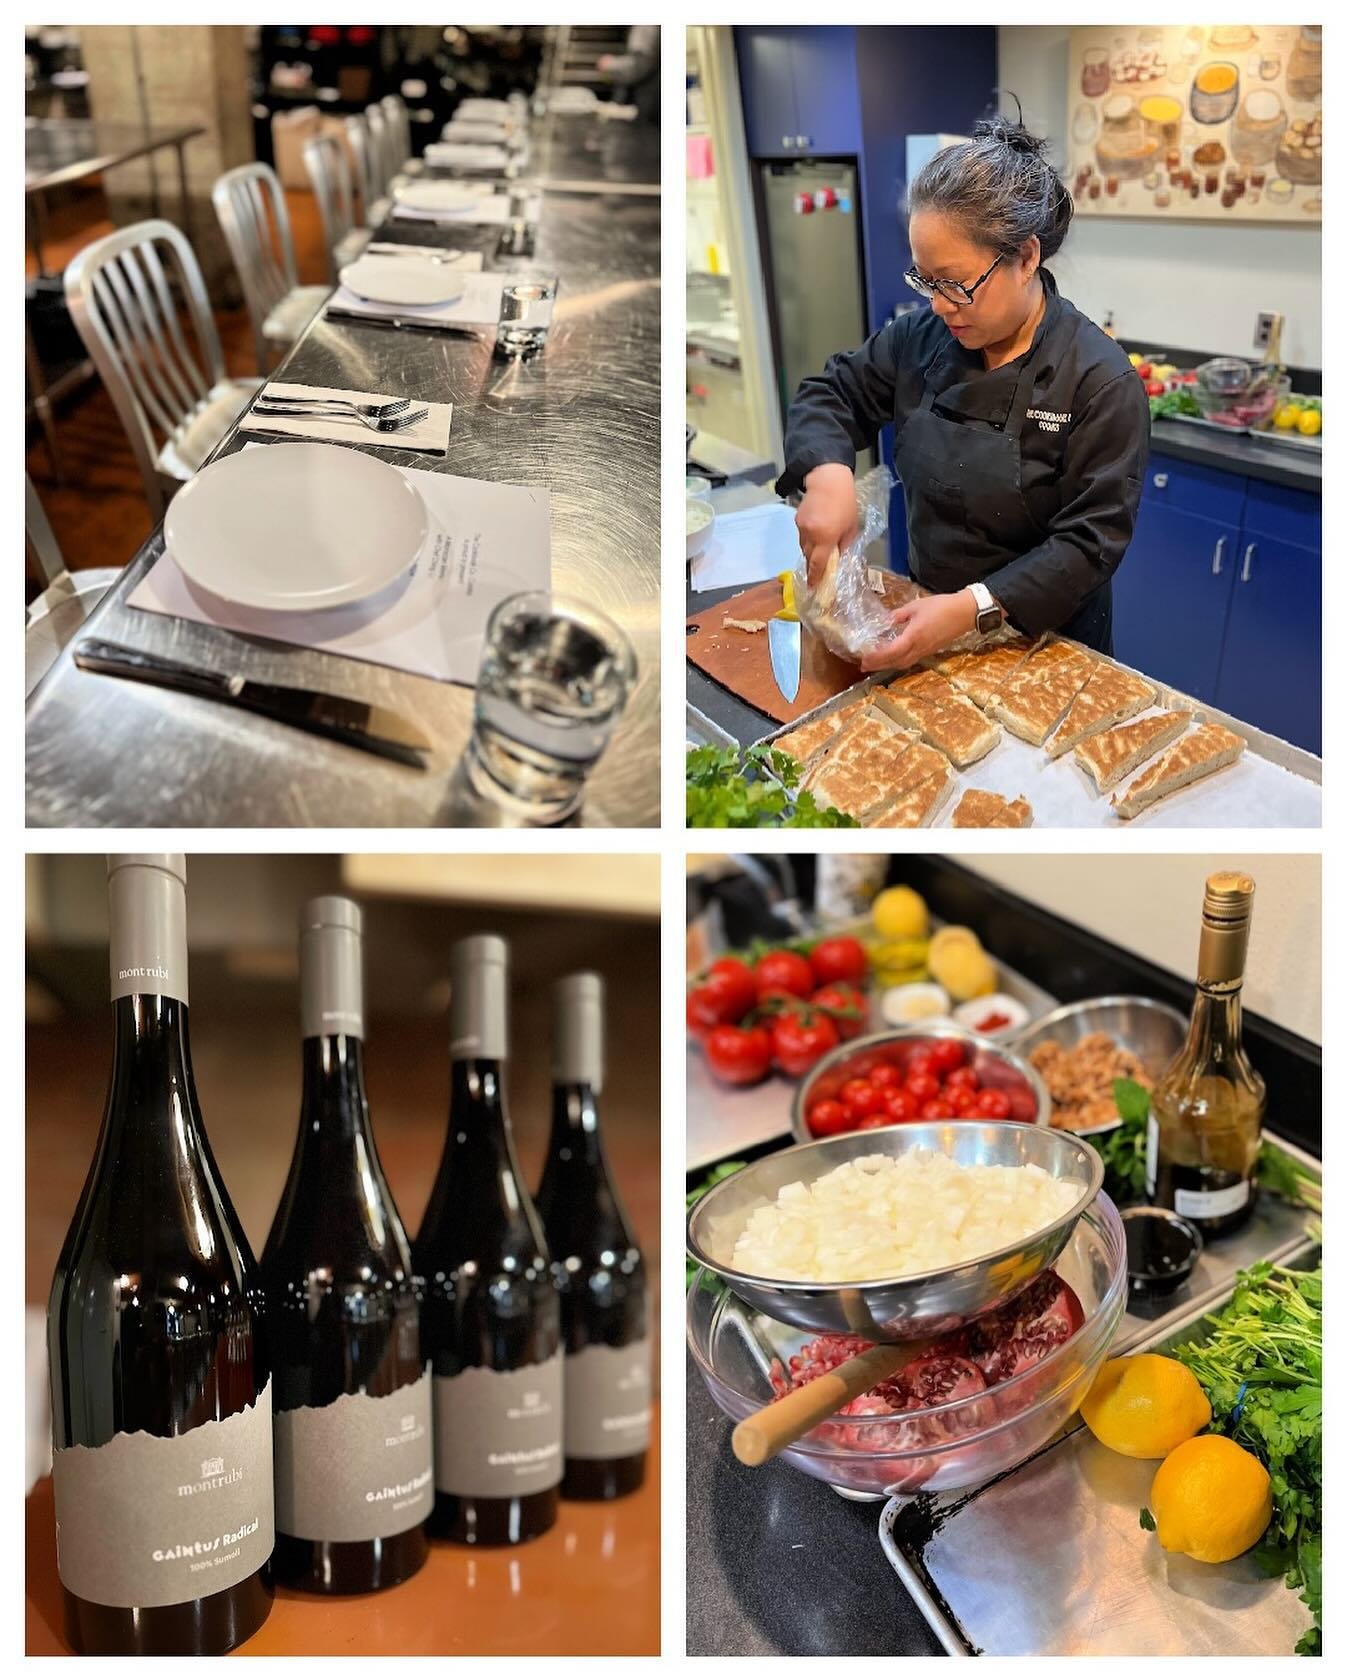 ✨Looking for a fun team-building activity? Consider a cooking class! 

Our private classes are fun, interactive, and delicious. Get out of the office, roll up your sleeves, and get cooking with your colleagues. Prepare a great meal as a group, then s